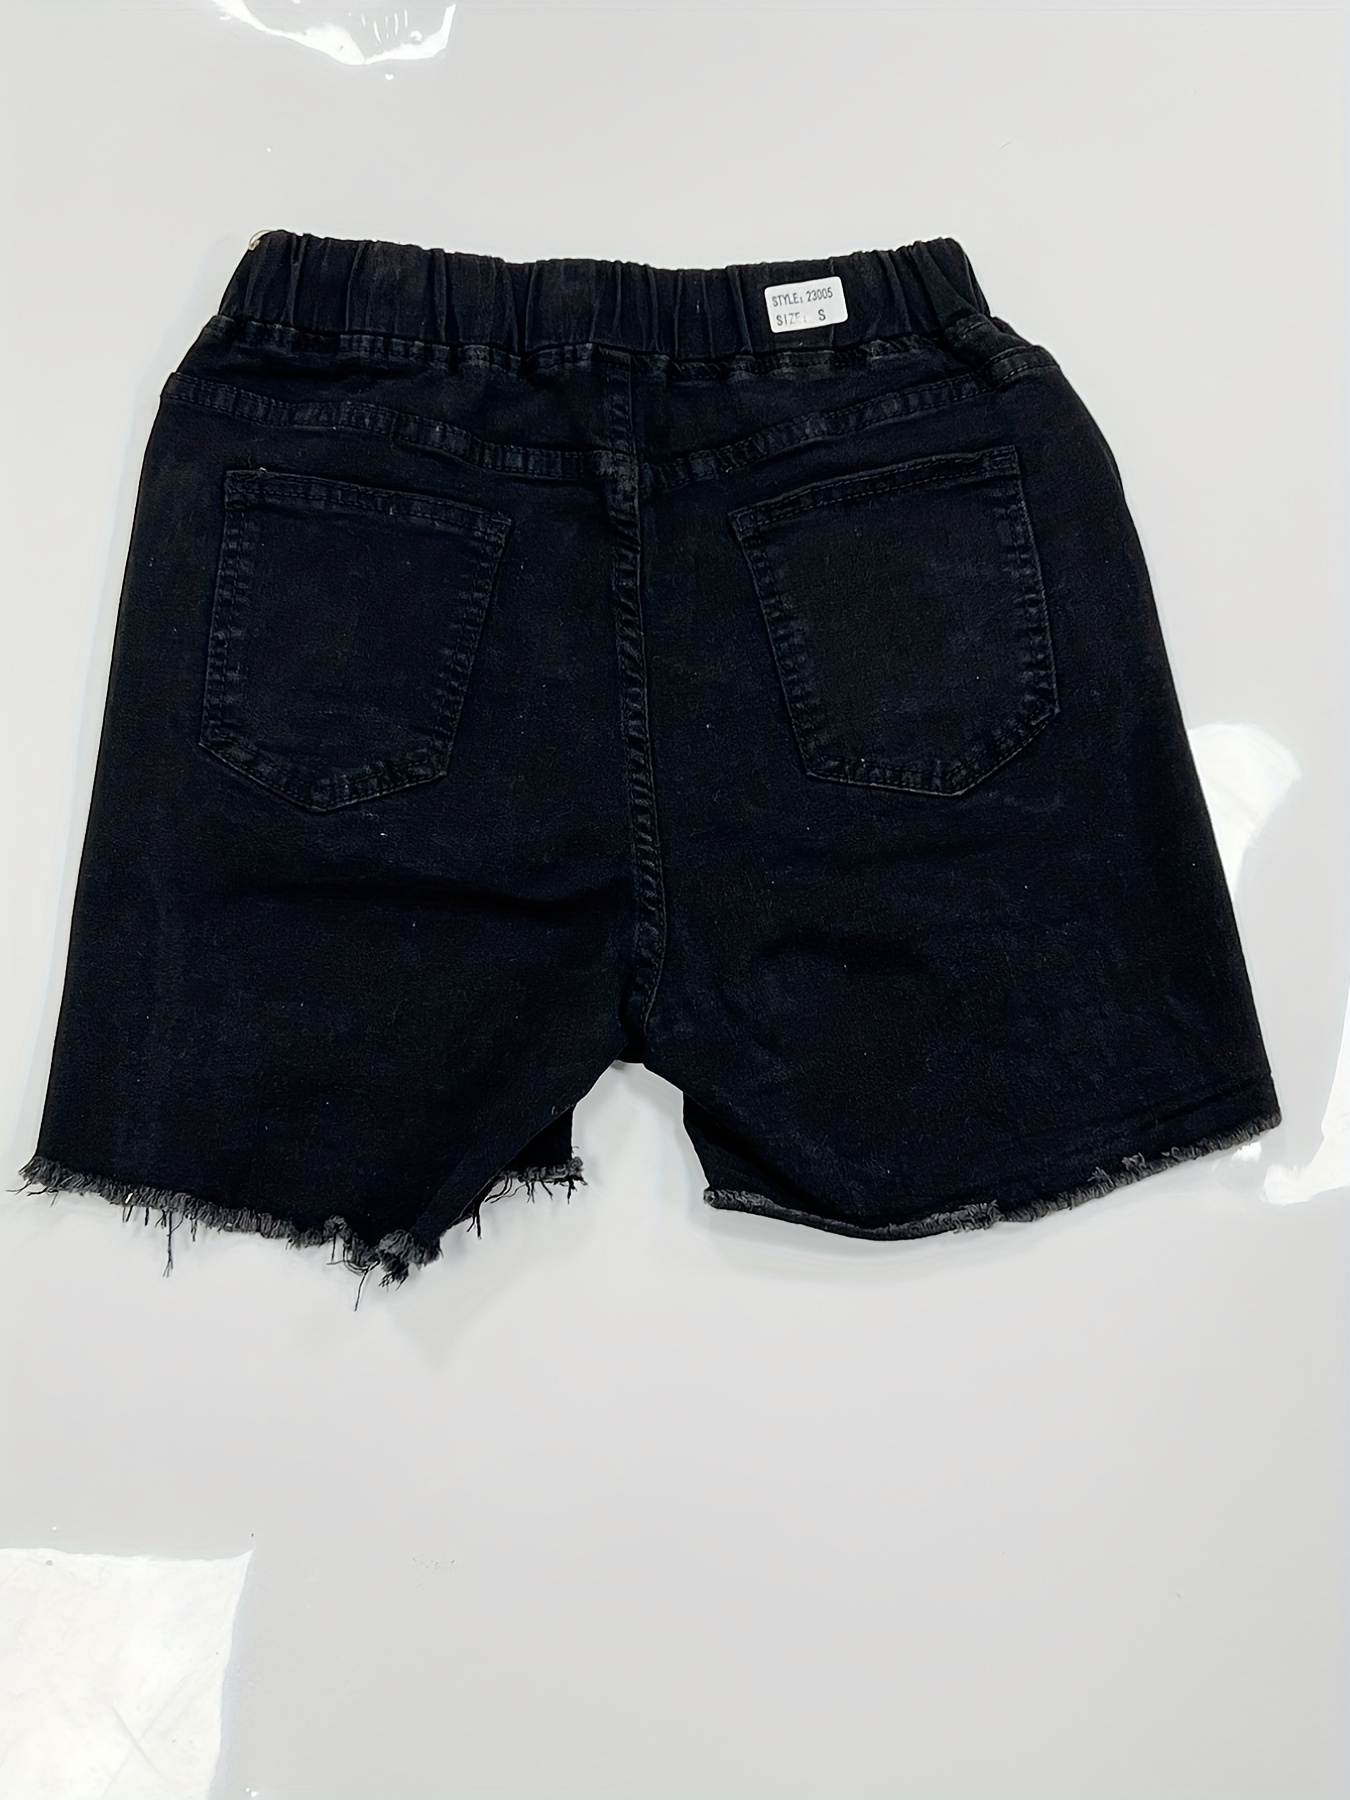 Ladies Black Denim Ripped Stretchy Summer Casual Shorts With